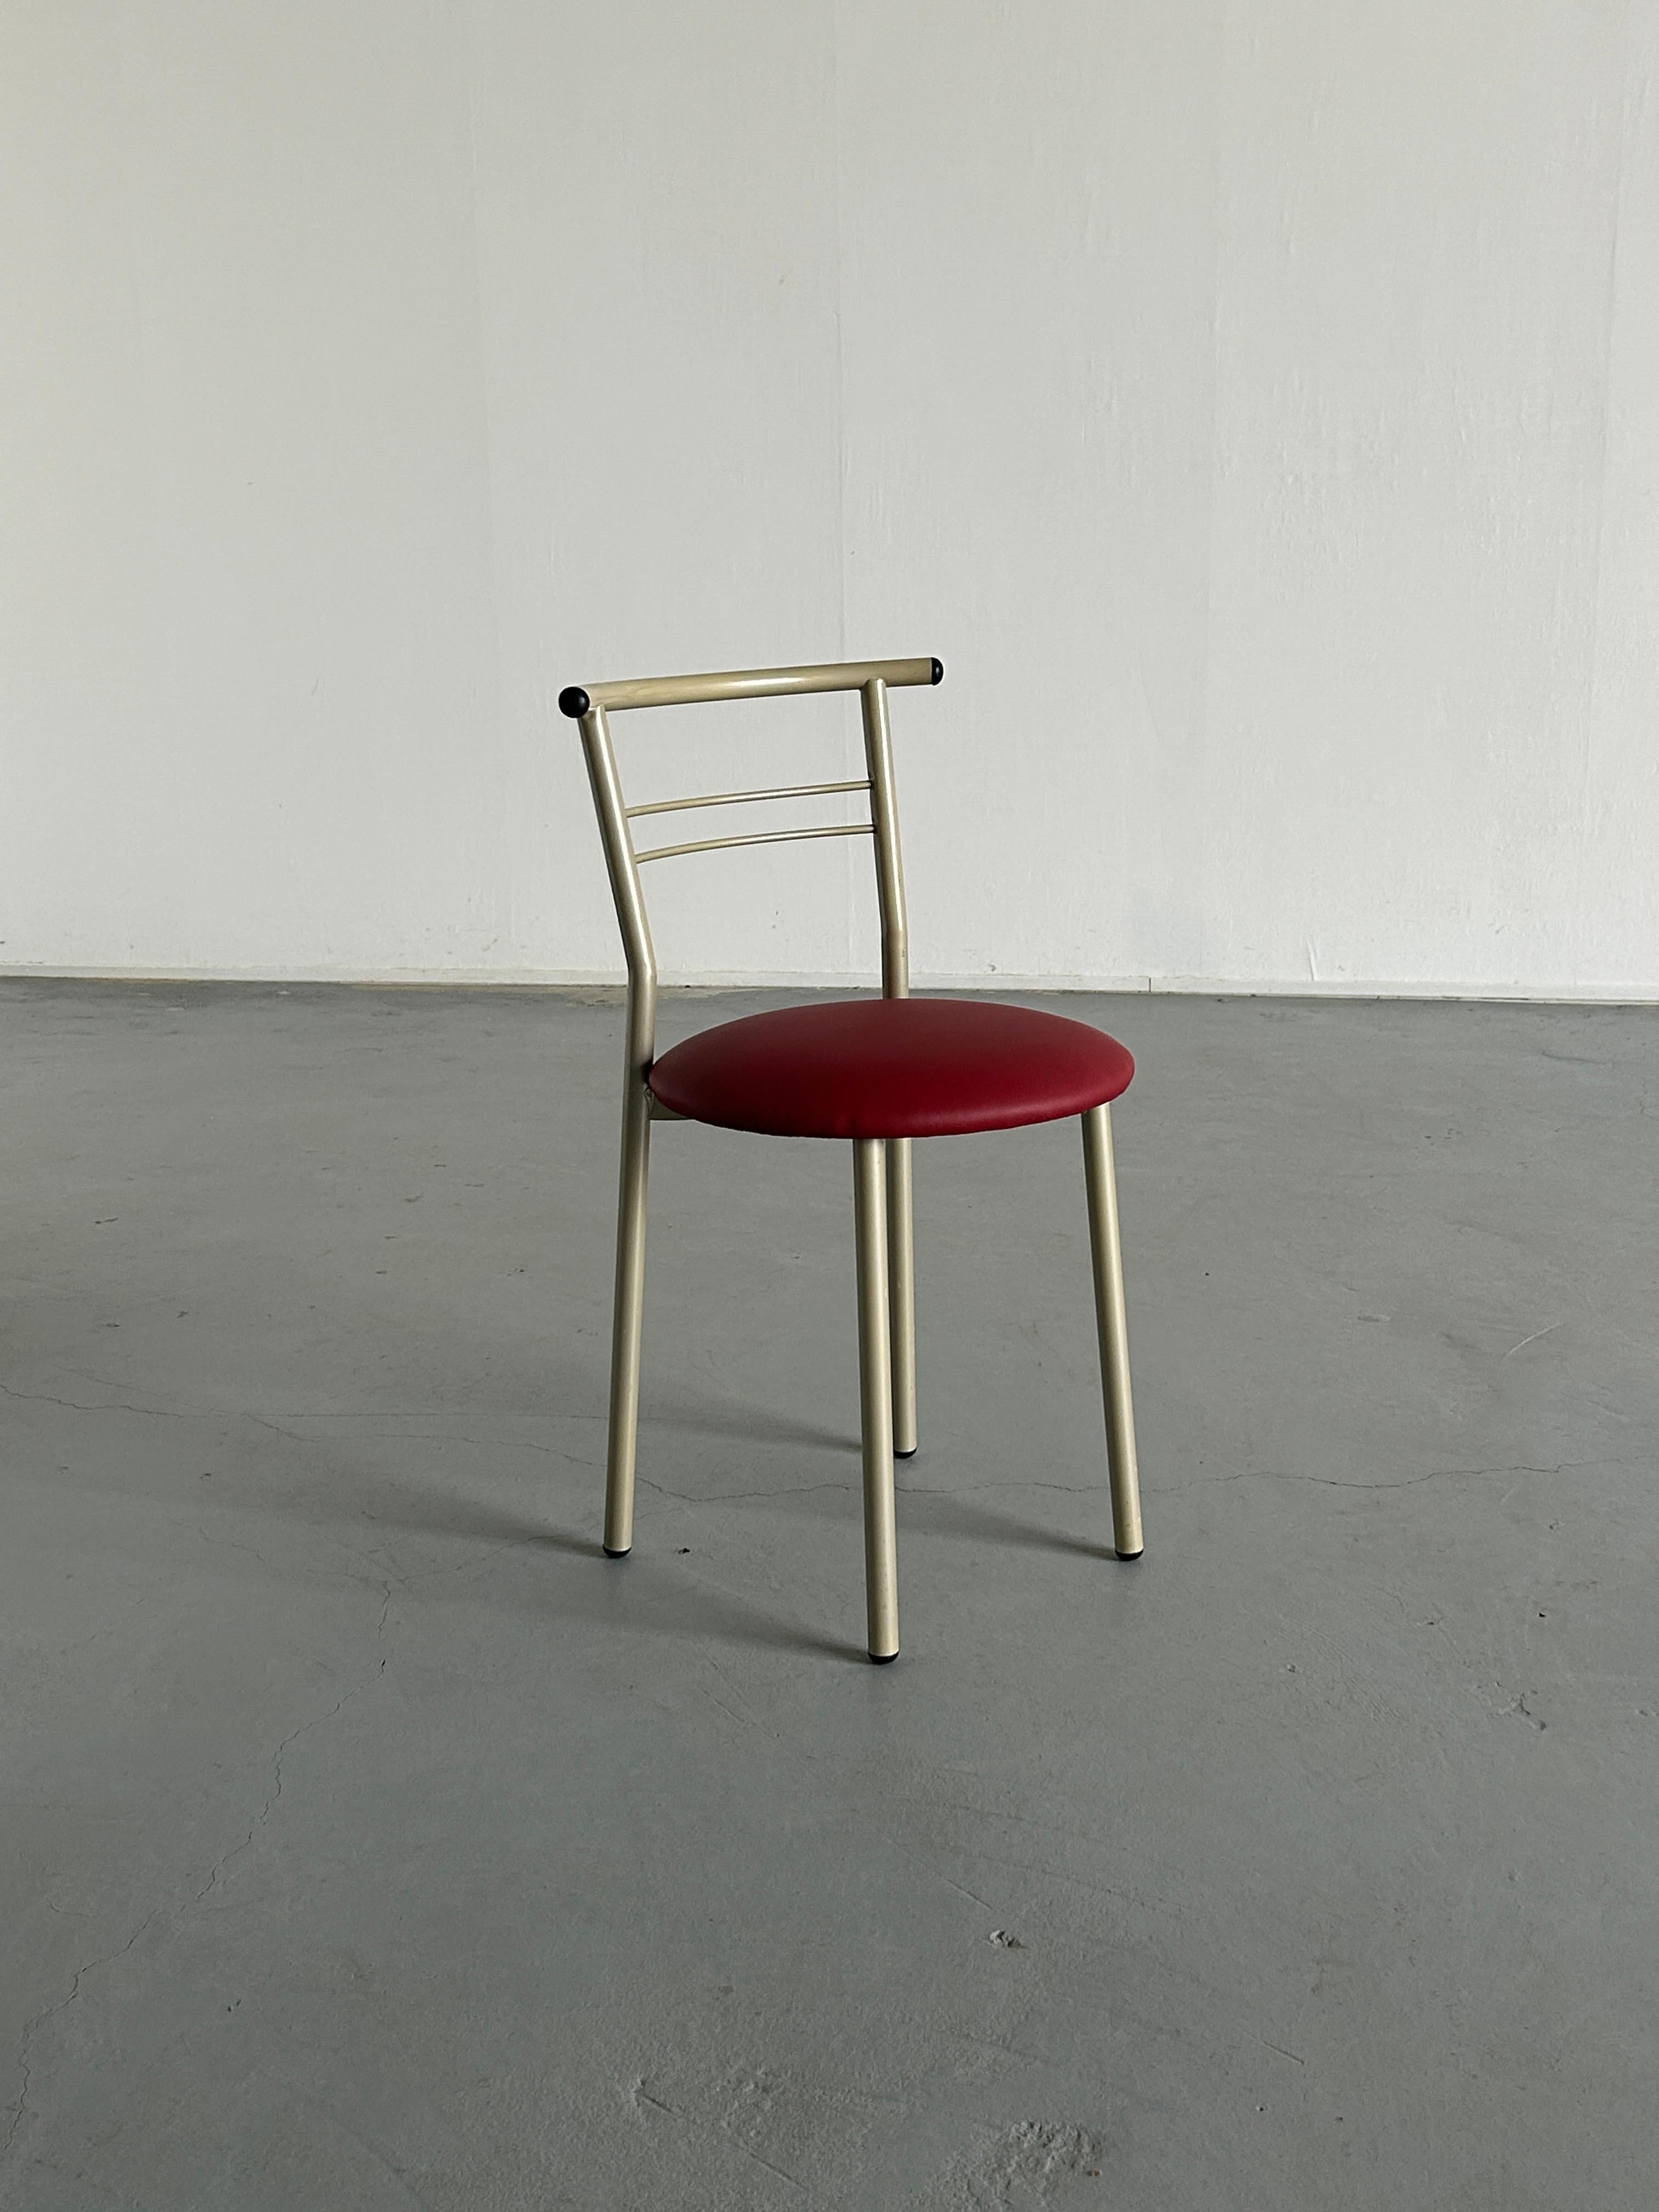 A unique vintage postmodern Memphis Milano style dining or accent chair, made from metal, with a red faux leather reupholstered seat.

Overall in very good vintage condition with expected signs of age, highlighted in the photos. 
Structurally